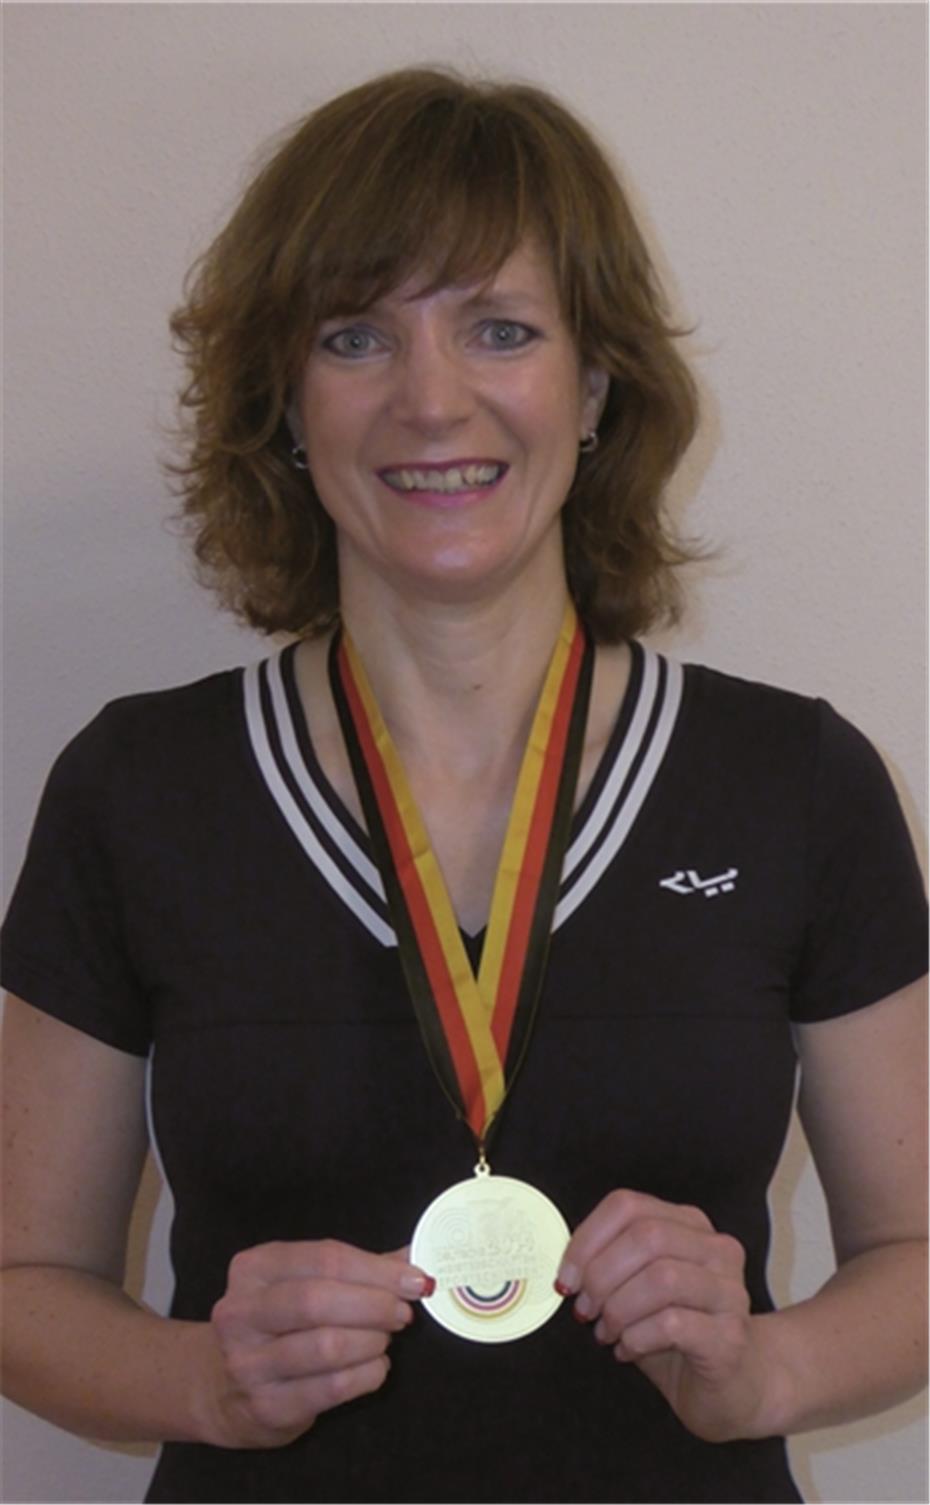 Susi Mathes holte
die Goldmedaille